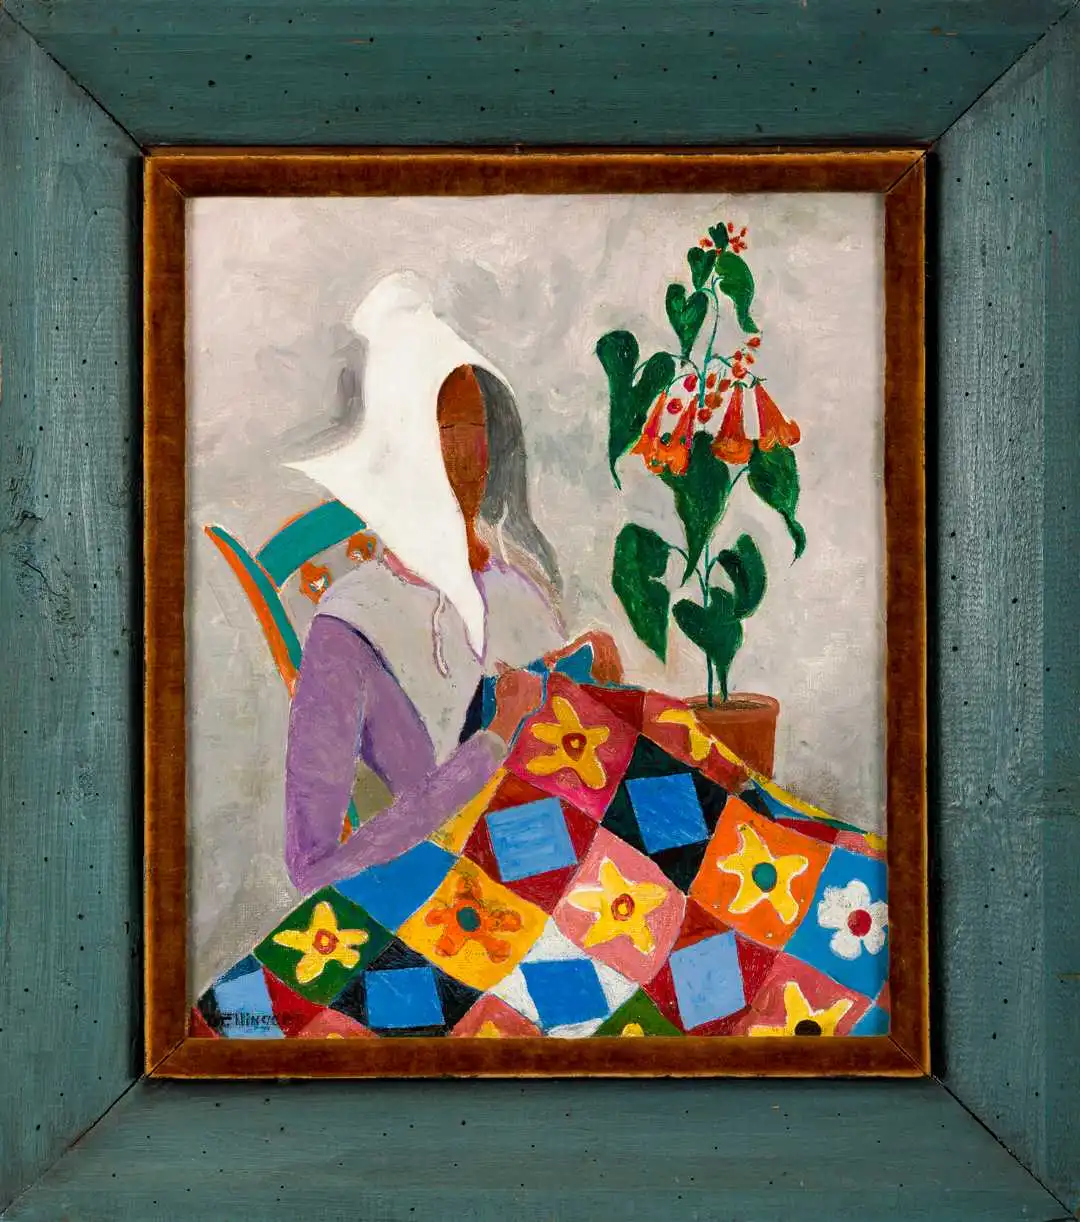 Oil painting of a person in front of a flower plan creating a colorful quilt.